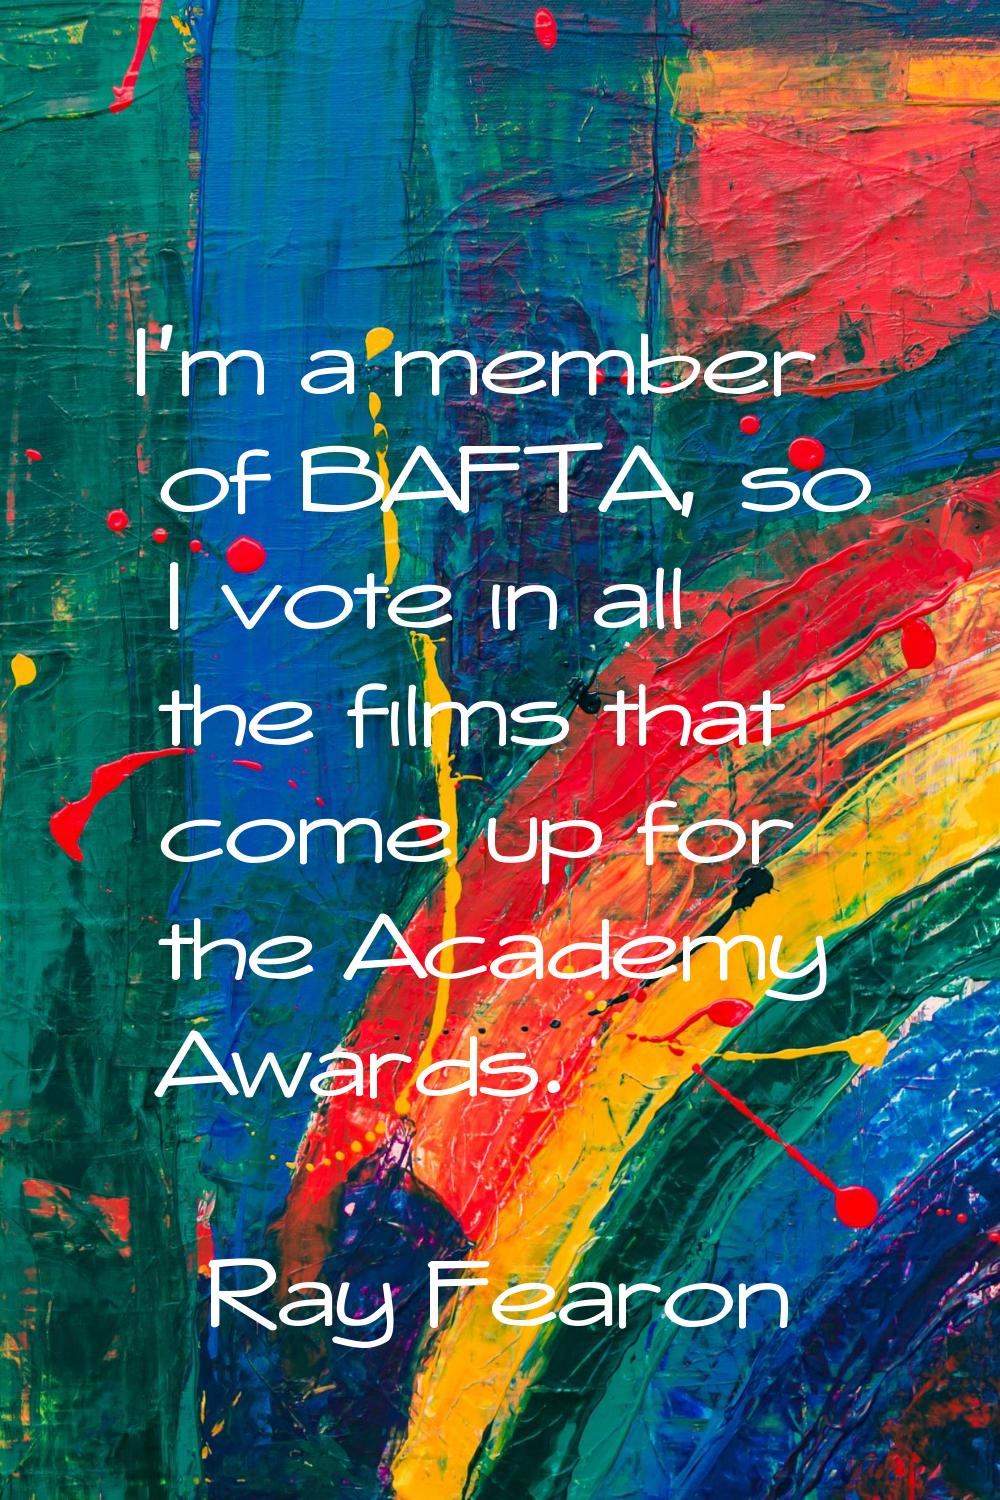 I'm a member of BAFTA, so I vote in all the films that come up for the Academy Awards.